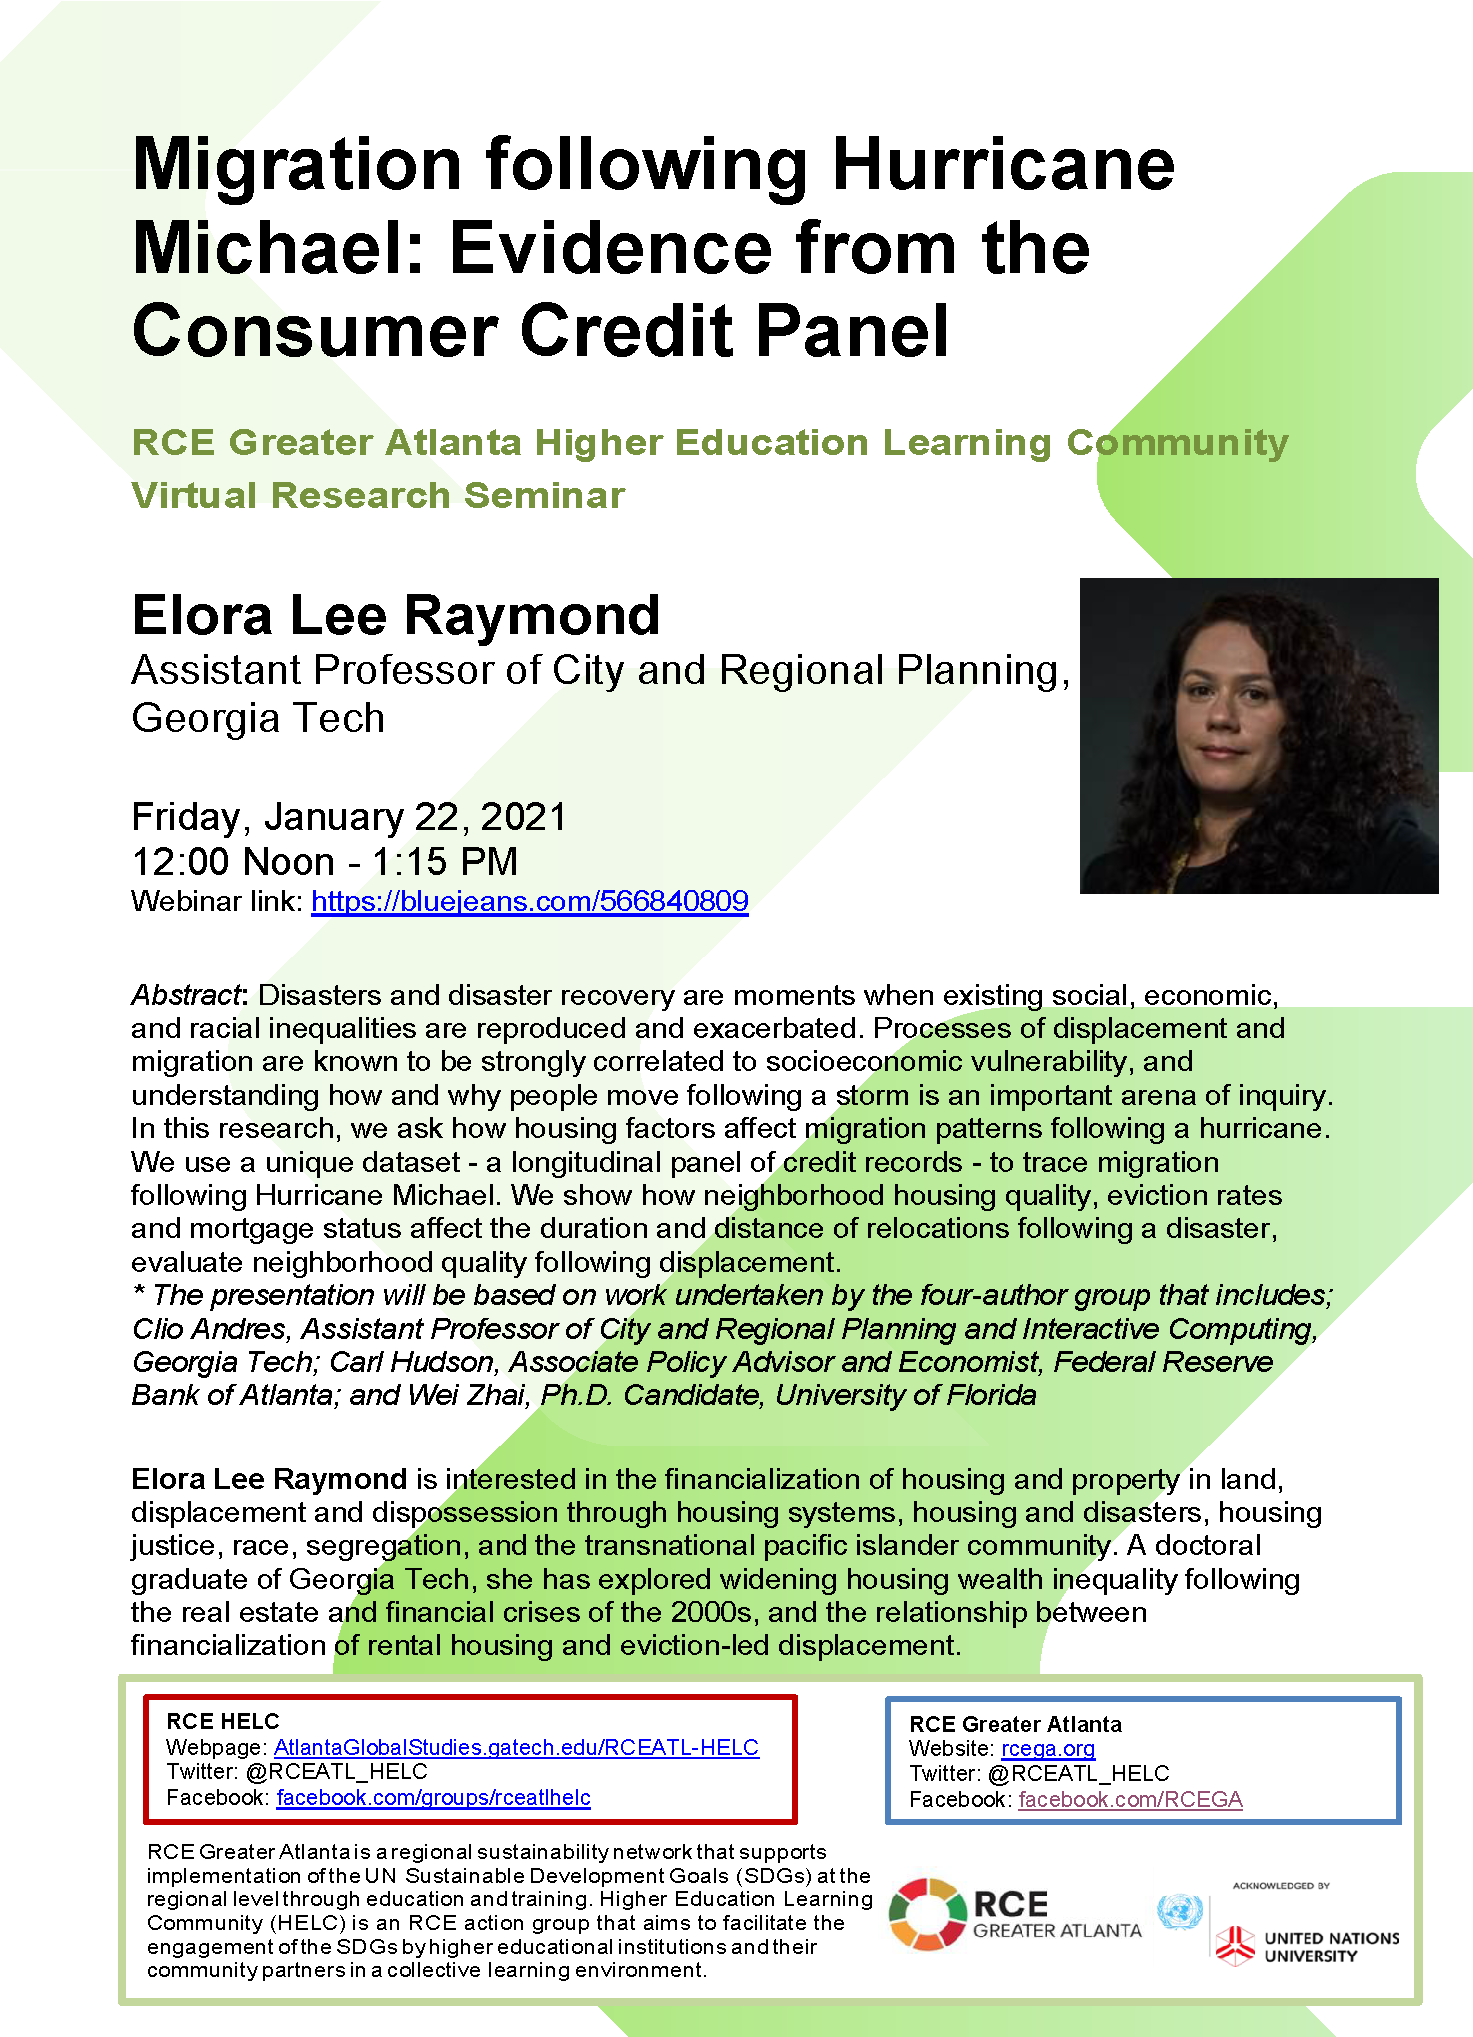 Migration following Hurricane Michael: Evidence from the Consumer Credit Panel